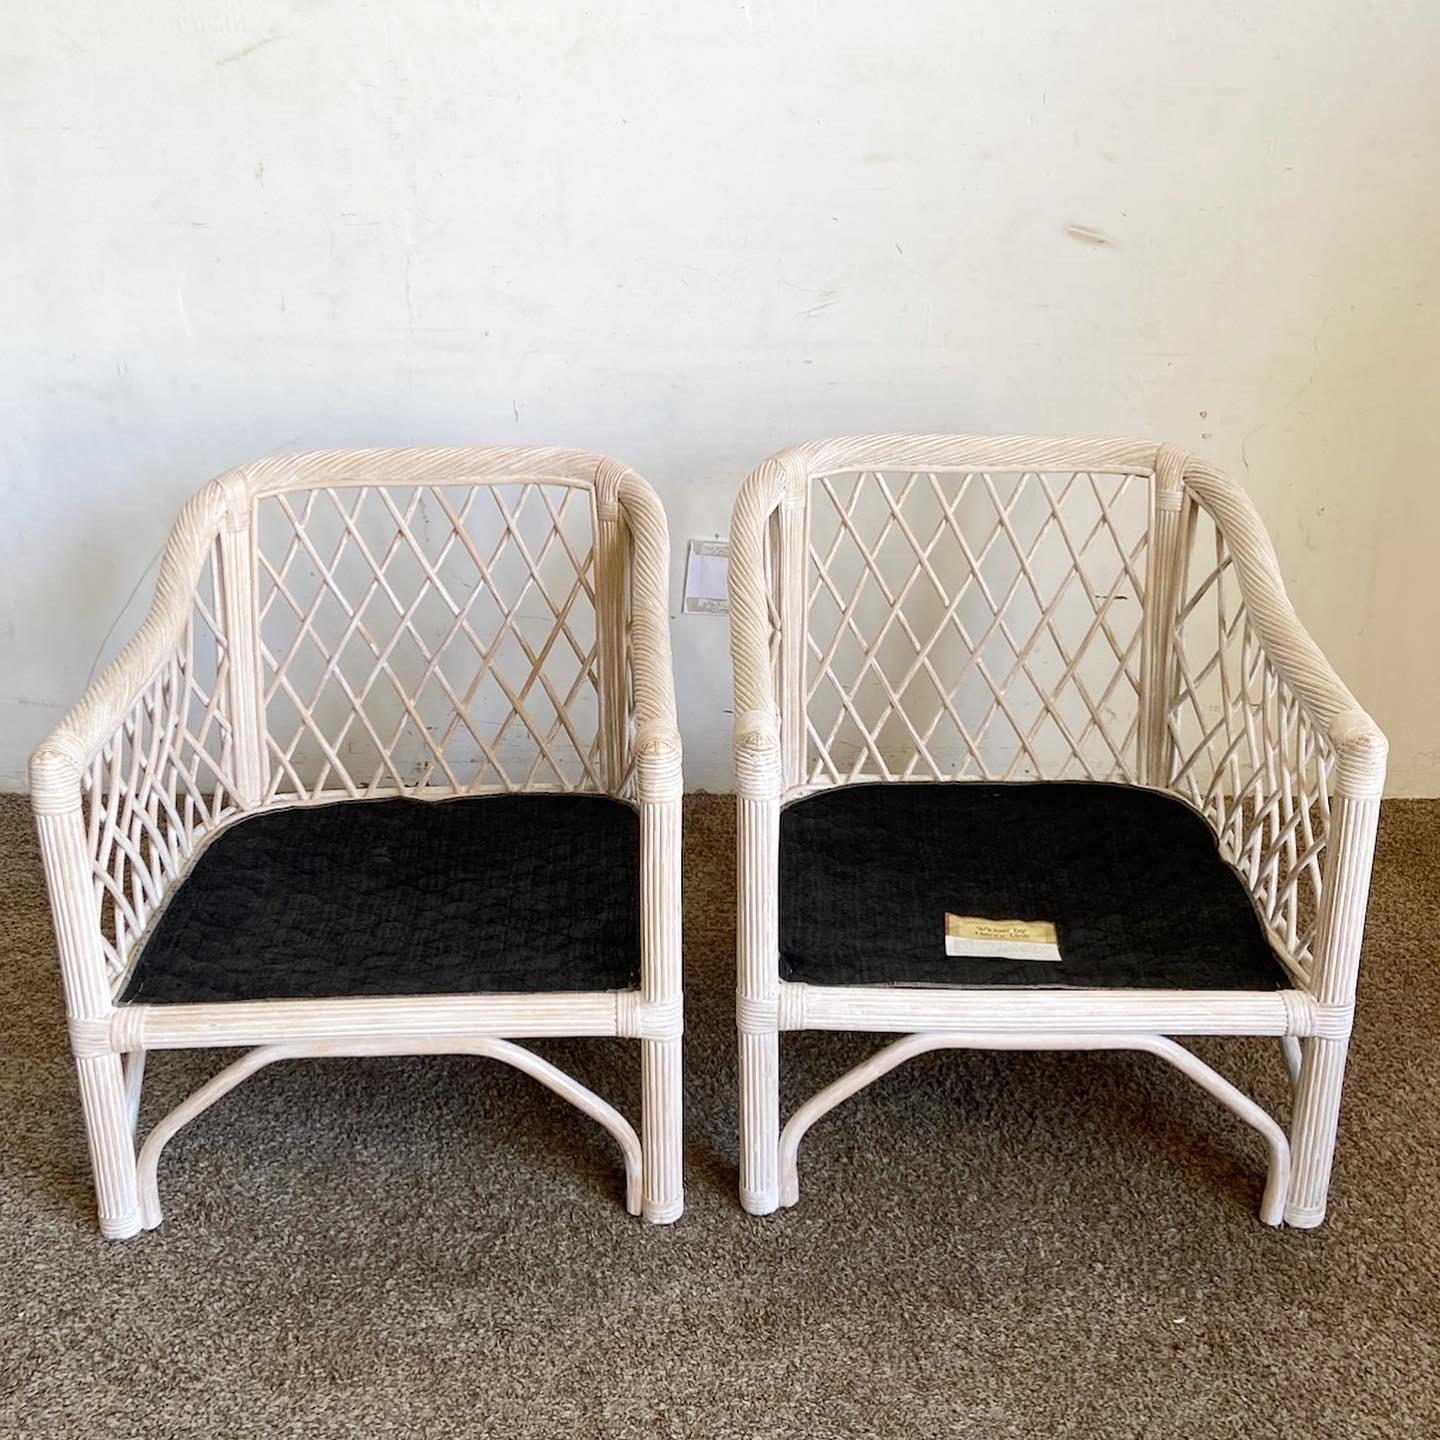 20th Century Boho Chic Rattan and Pencil Reed Arm Chairs by Henry Link - a Pair For Sale